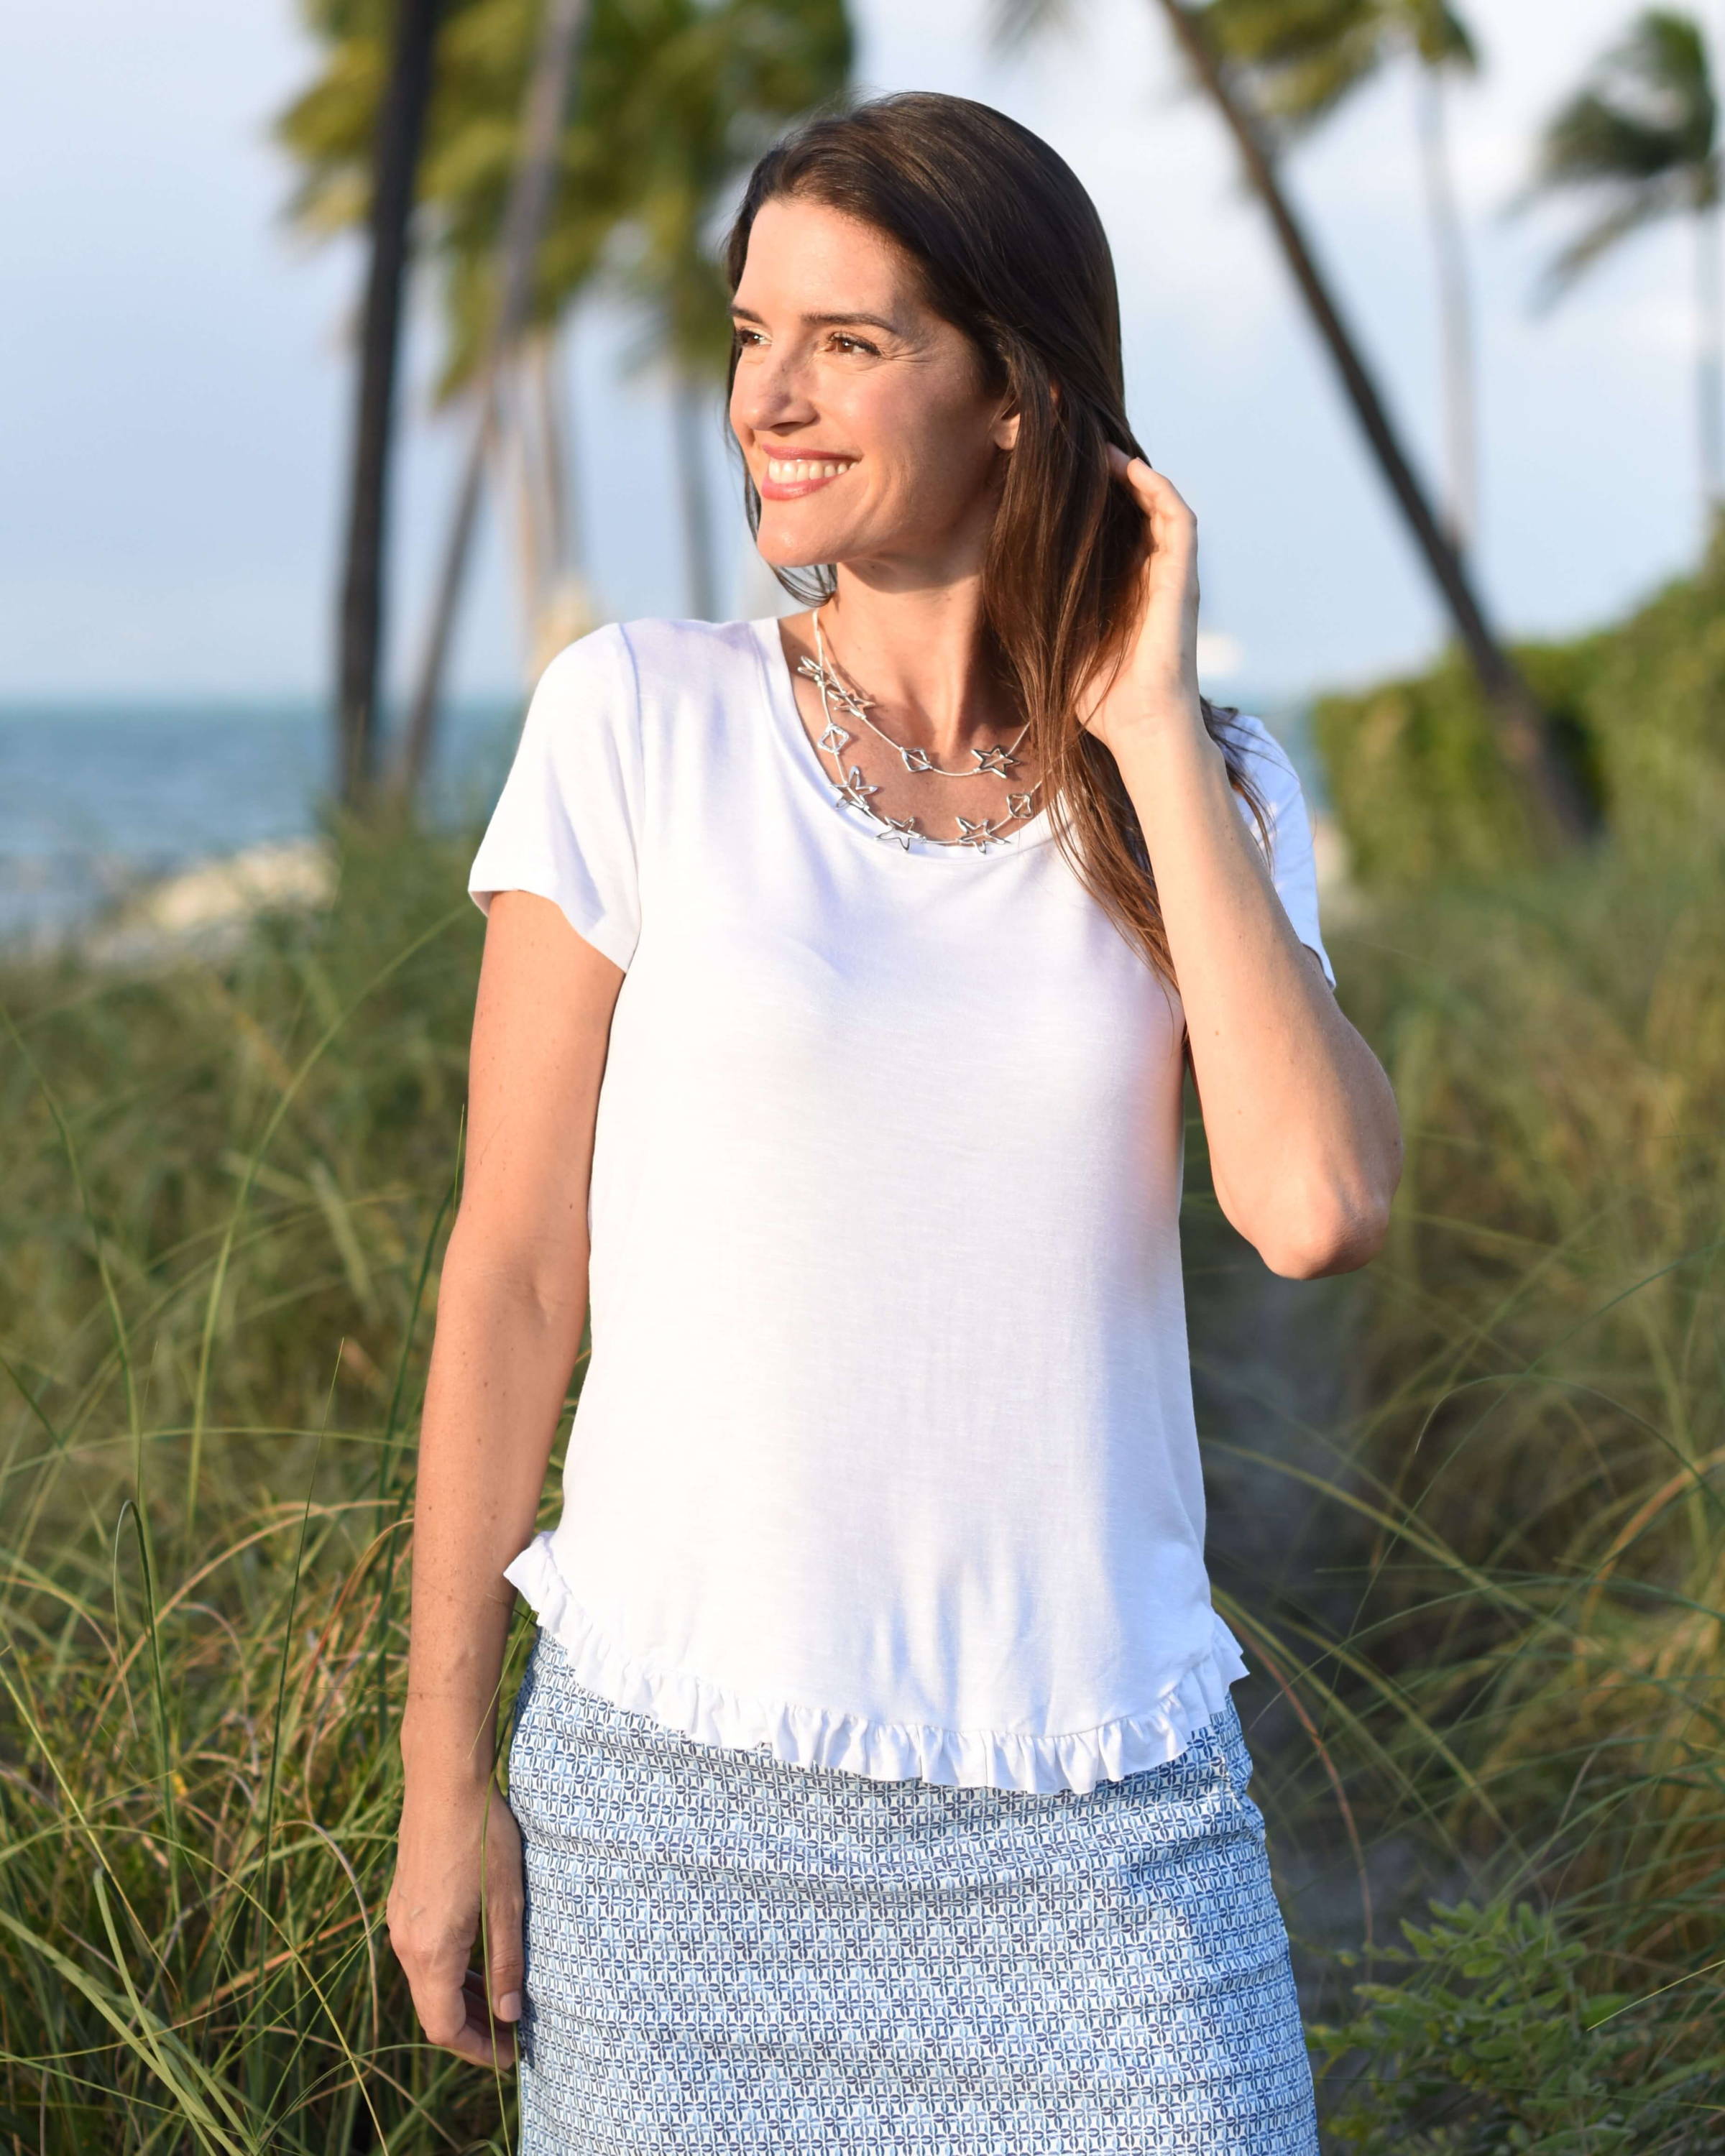 A smiling brunette woman in a white top and blue skort runs her hand through her hair at the beach. 